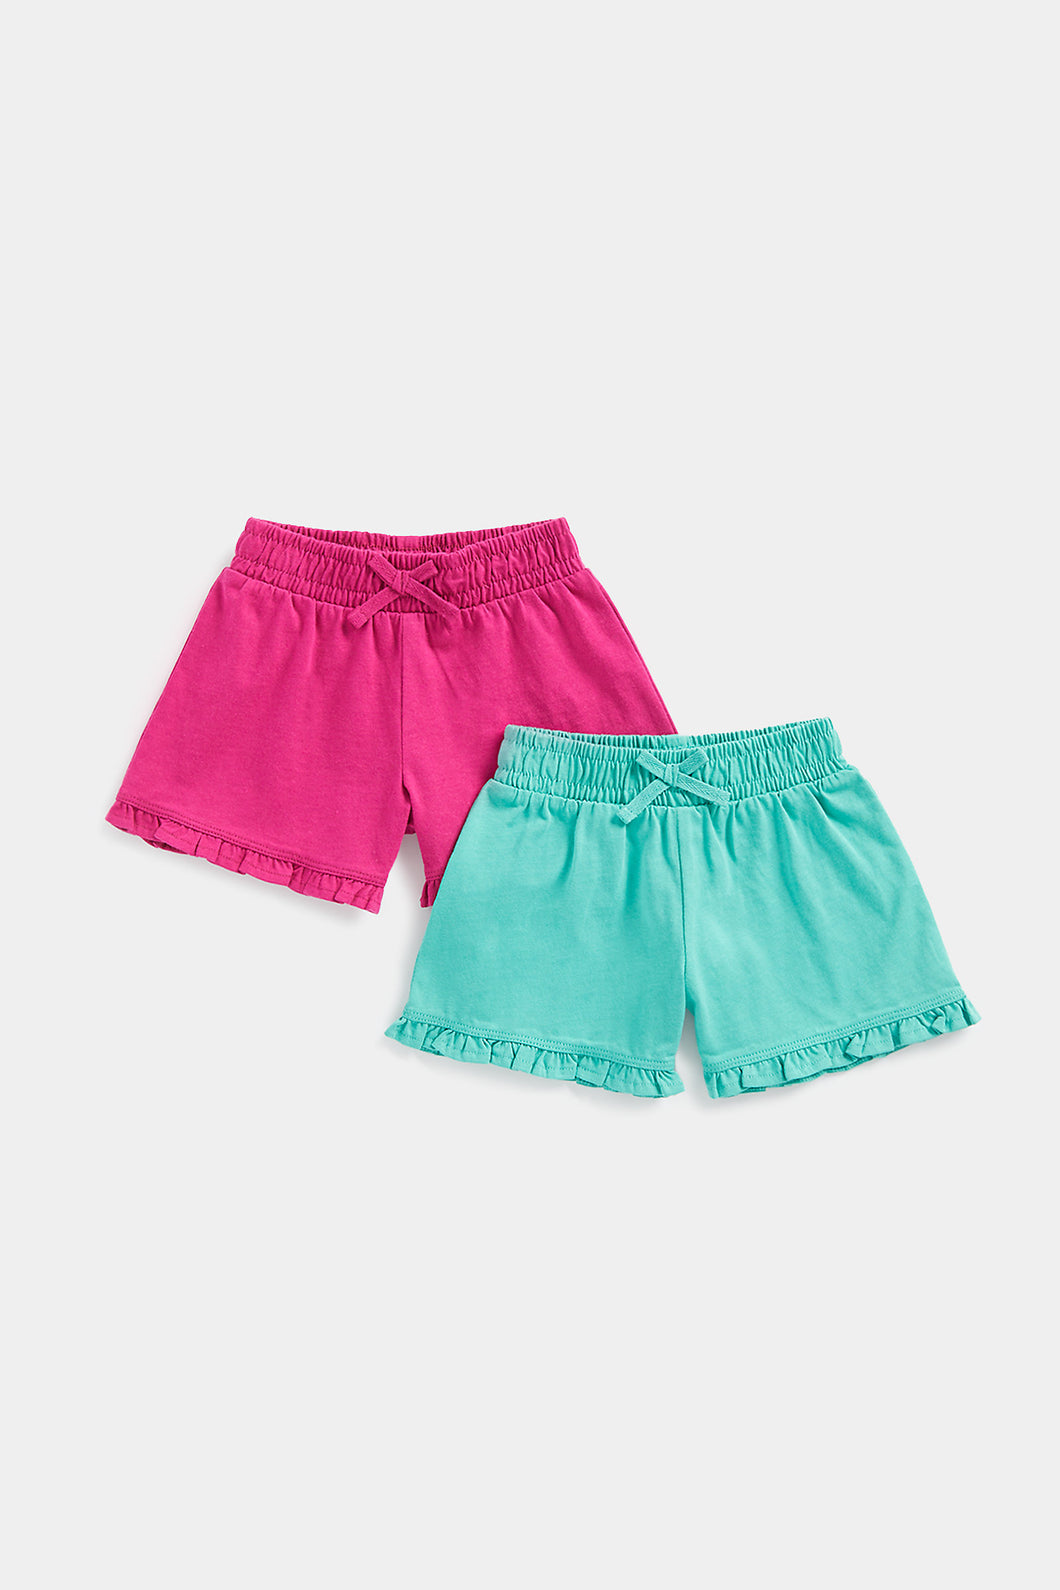 Mothercare Green And Pink Jersey Shorts - 2 Pack